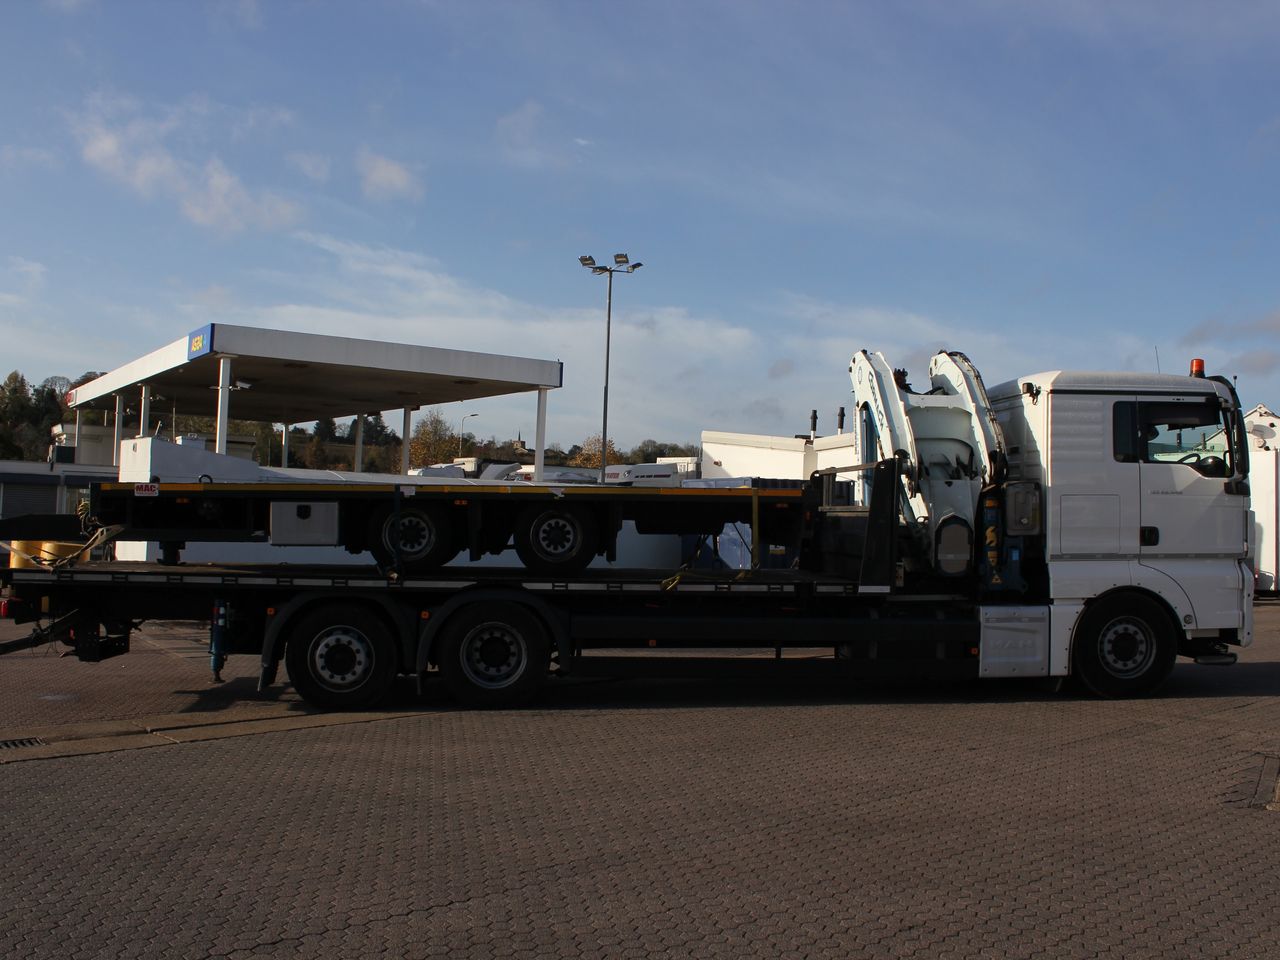 Ready to go MAN TGX 26.440, Cabin Spec, 440, 26 Tonne, Sleeper Cab, Automatic, 2x  Flashing Beacons on Roof, Cab Fridge, Cab Sunvisor With LED Lights, Electric Windows, Heated Electric Mirrors, , Cormach, Serie 45000 E6 ASC | for sale at MV Commercial, the UKs leading Truck, Trailers and Van supplier. (SN16YGO 23951)